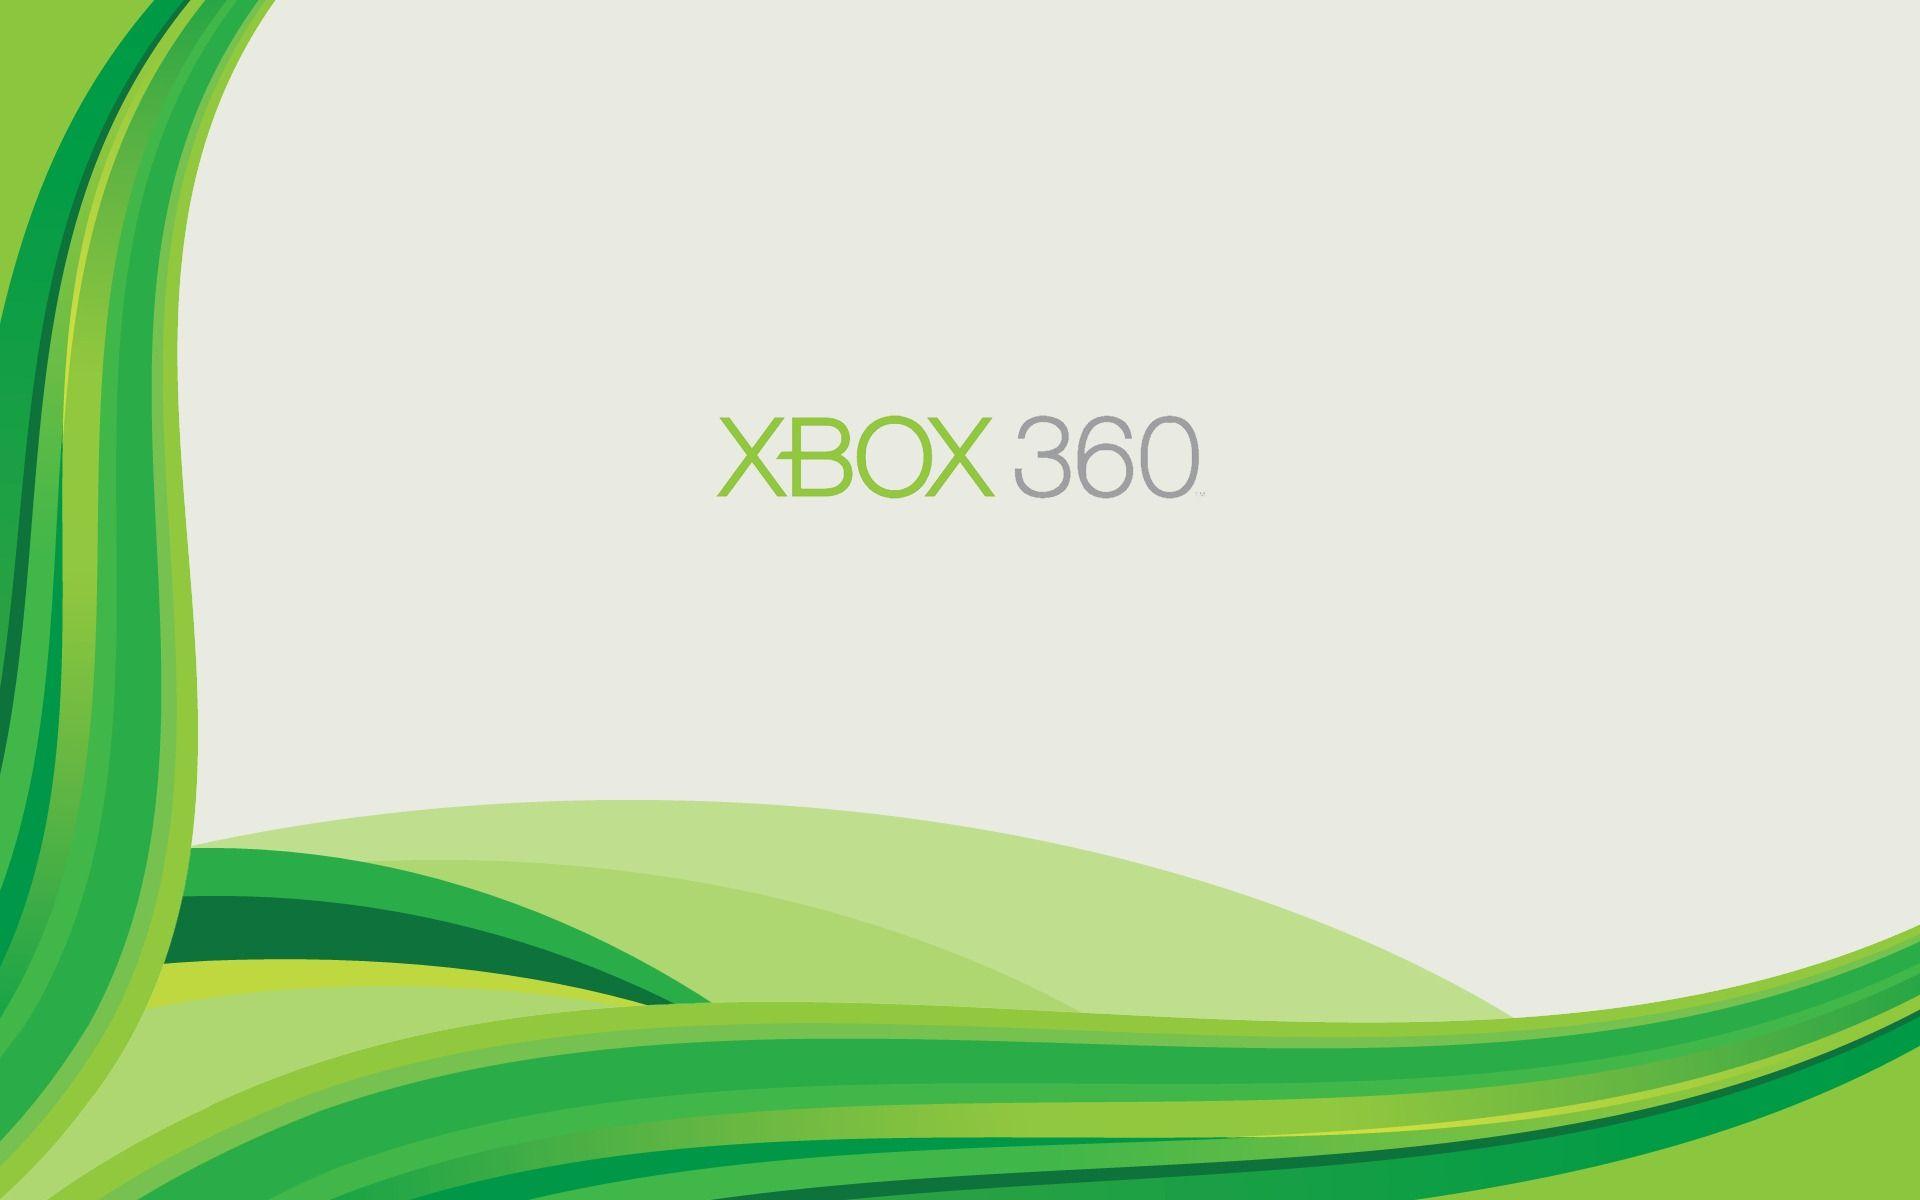 Made a few Xbox 360 blades style backgrounds to use with Xbox One and  Series consoles  rXboxSeriesX